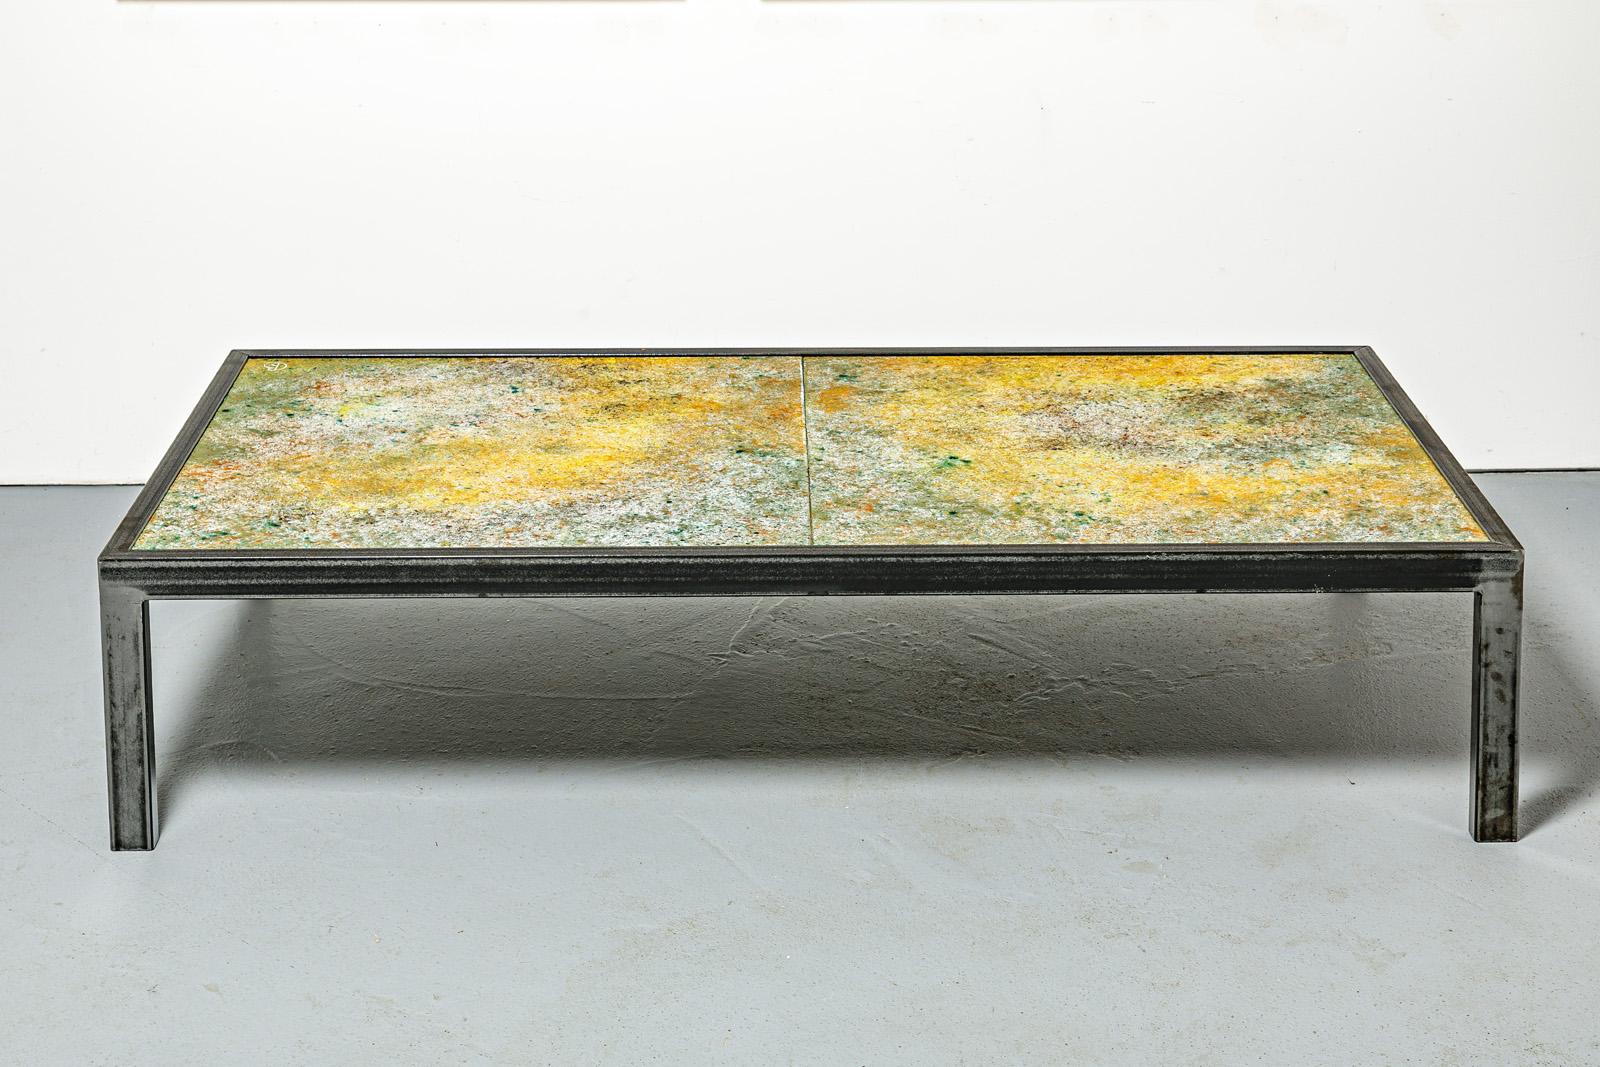 Set of 3 Large 20th Century Colored Ceramic Low Tables by Bernard Buffat 1970 For Sale 5